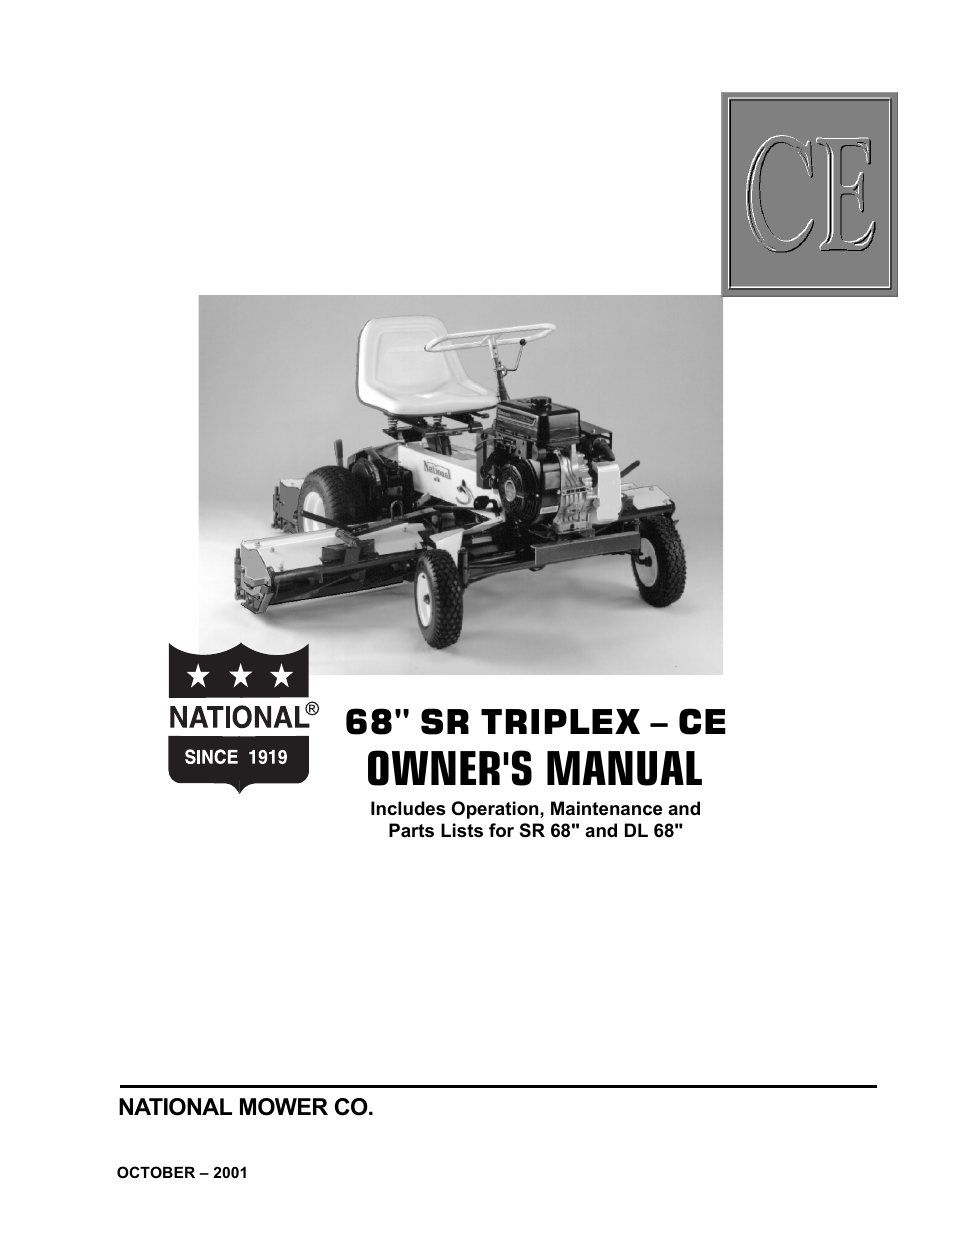 National Mower Triplex-CE DL 68" User Manual | 36 pages